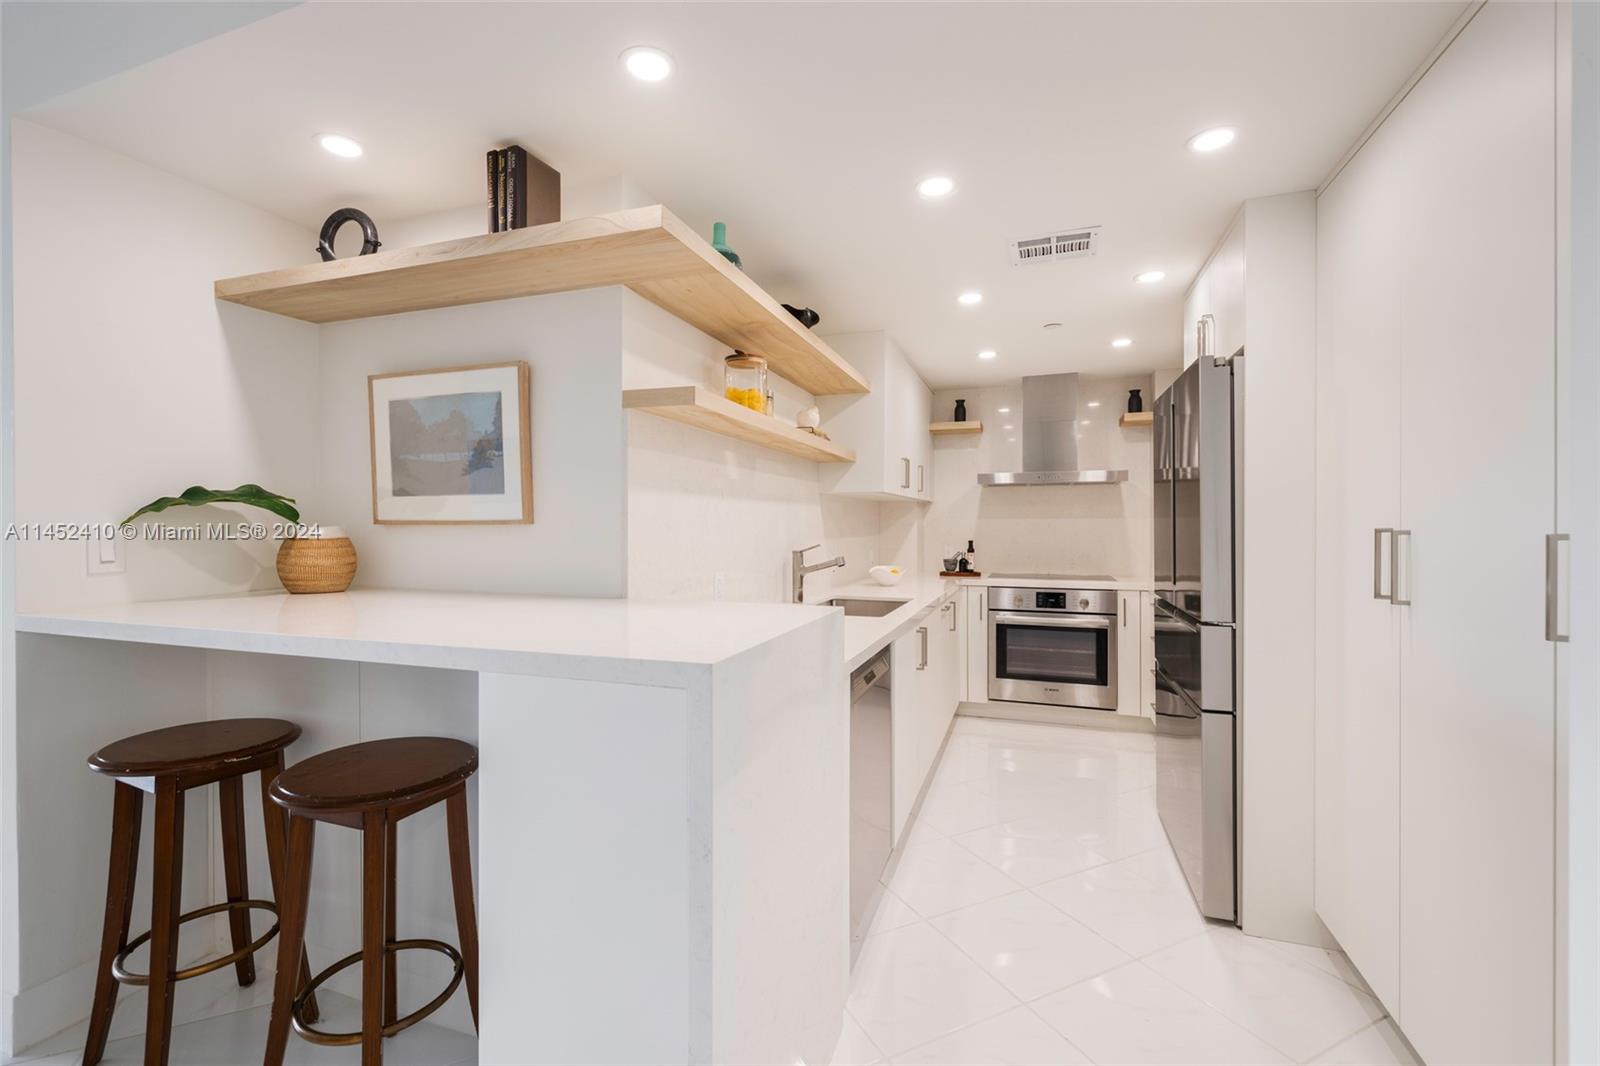 a kitchen with stainless steel appliances a sink cabinets and wooden floor